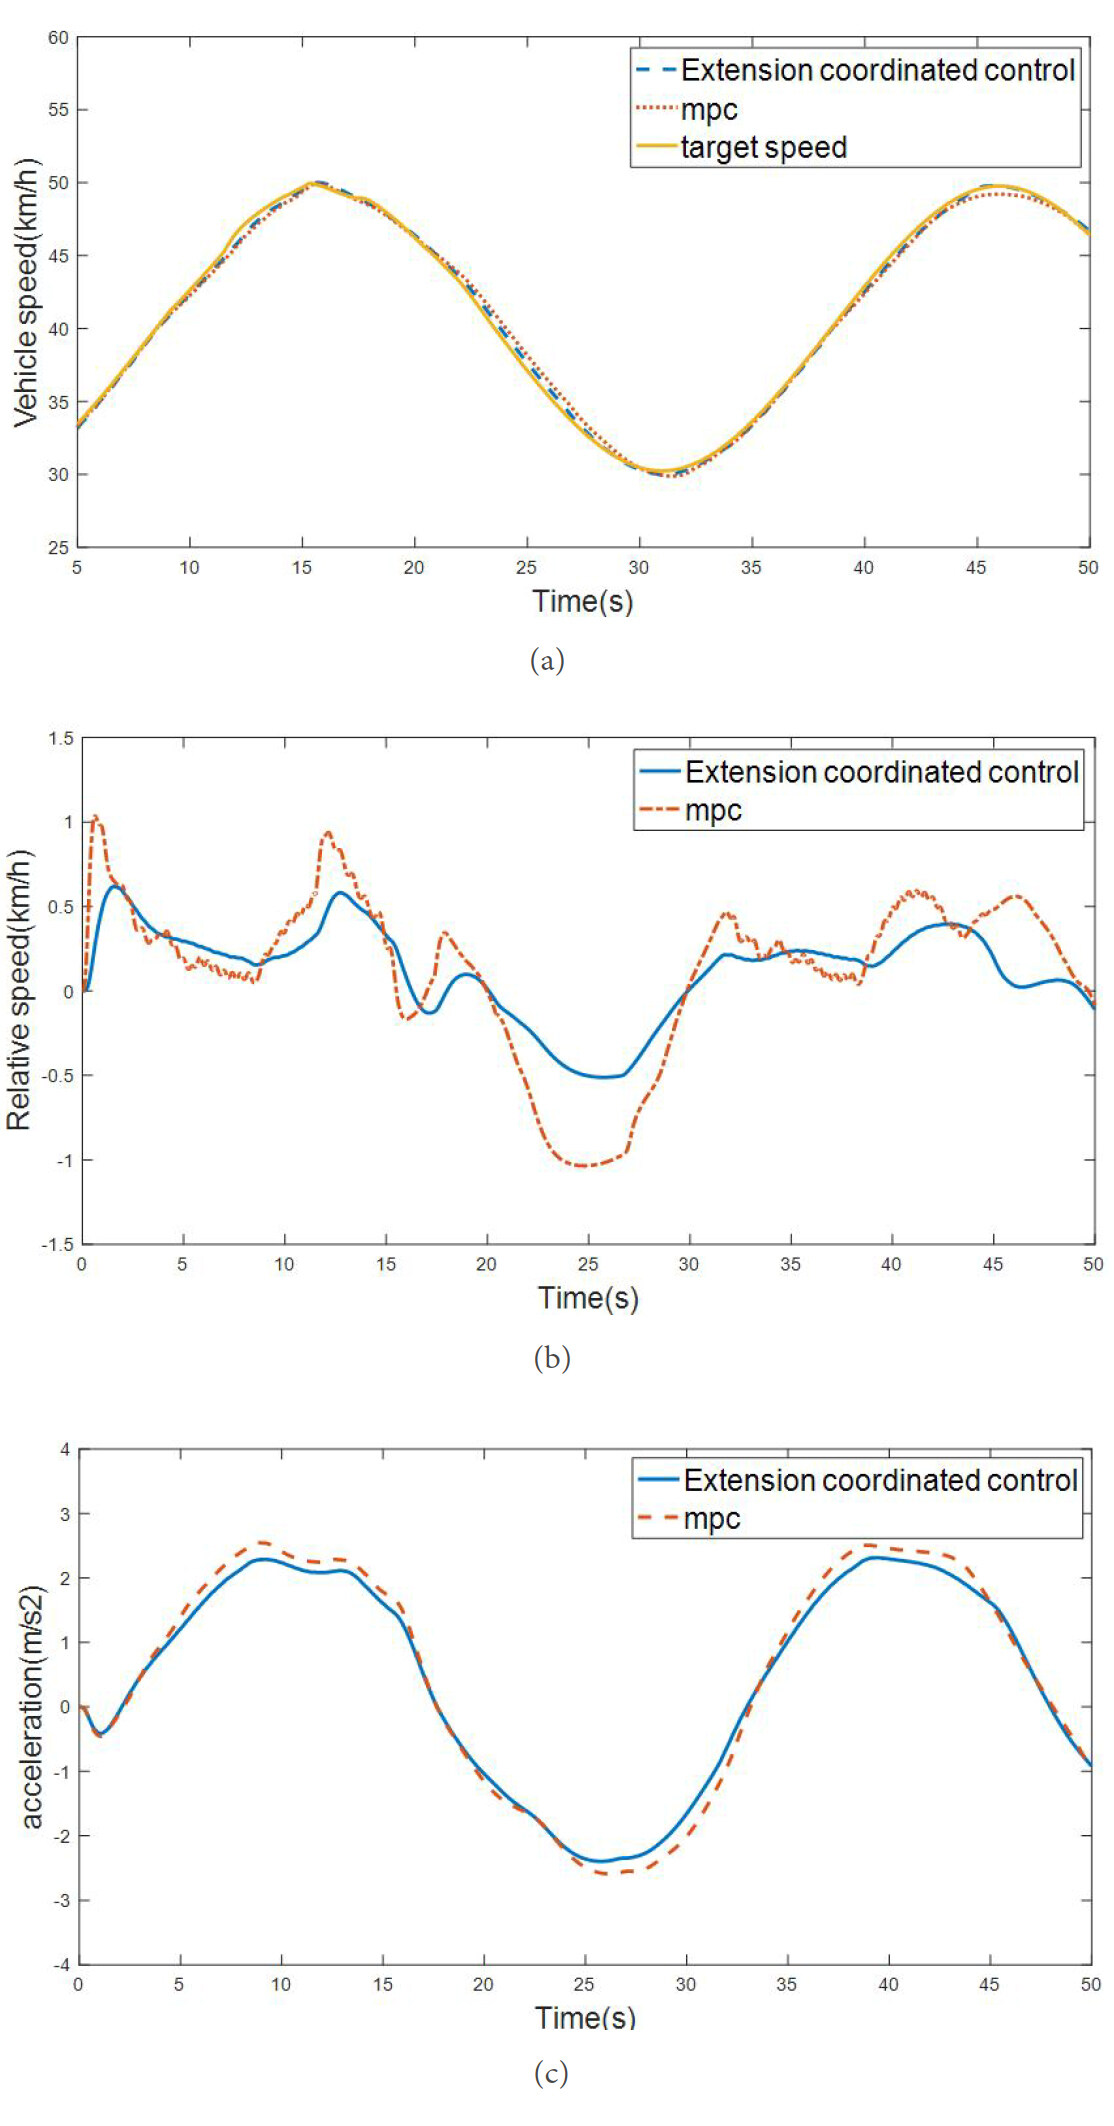 Model predictive control of multi-objective adaptive cruise system based on extension theory